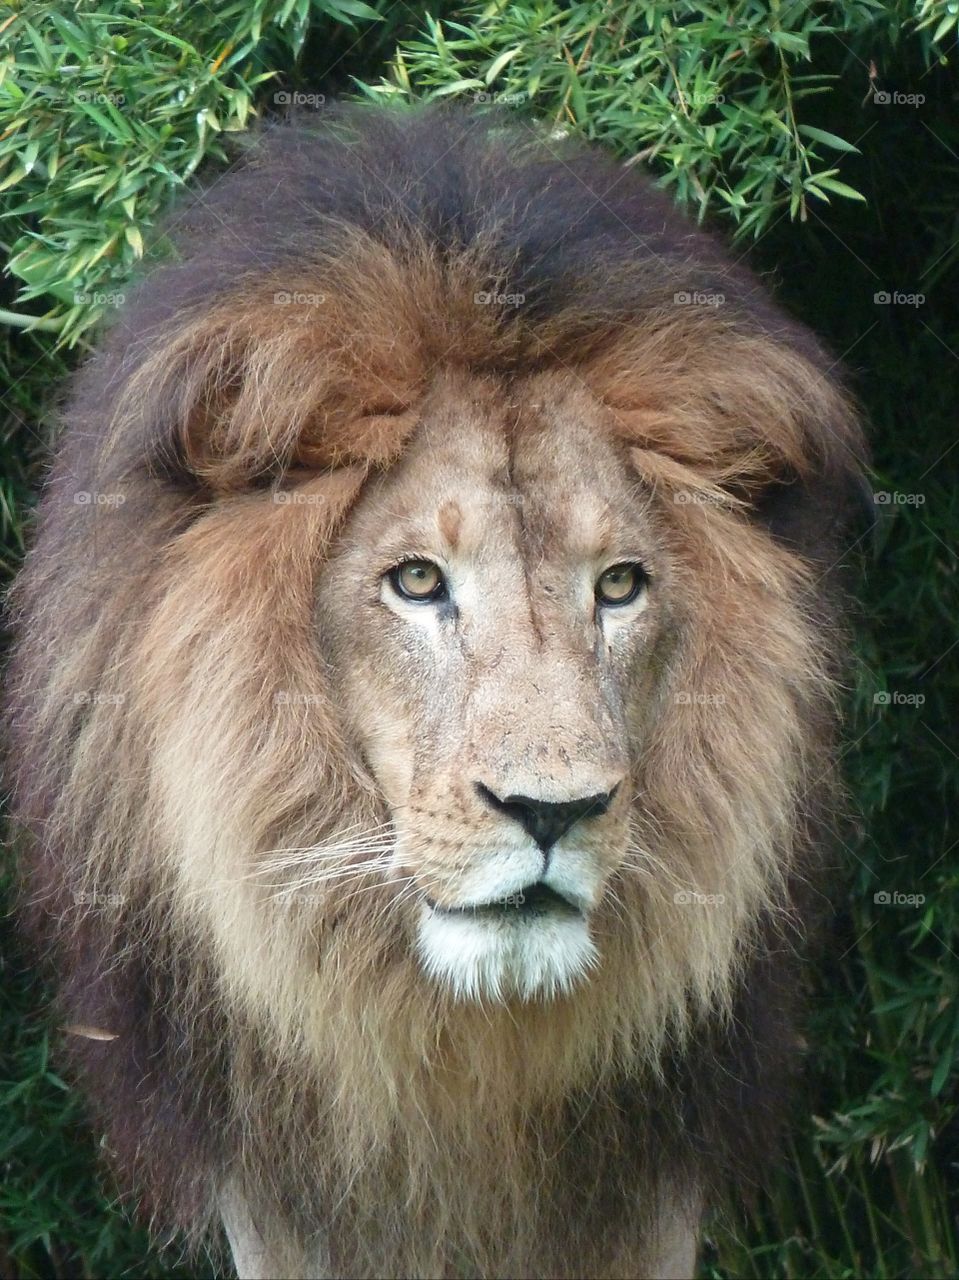 Lion in zoo of Pereira Colombia